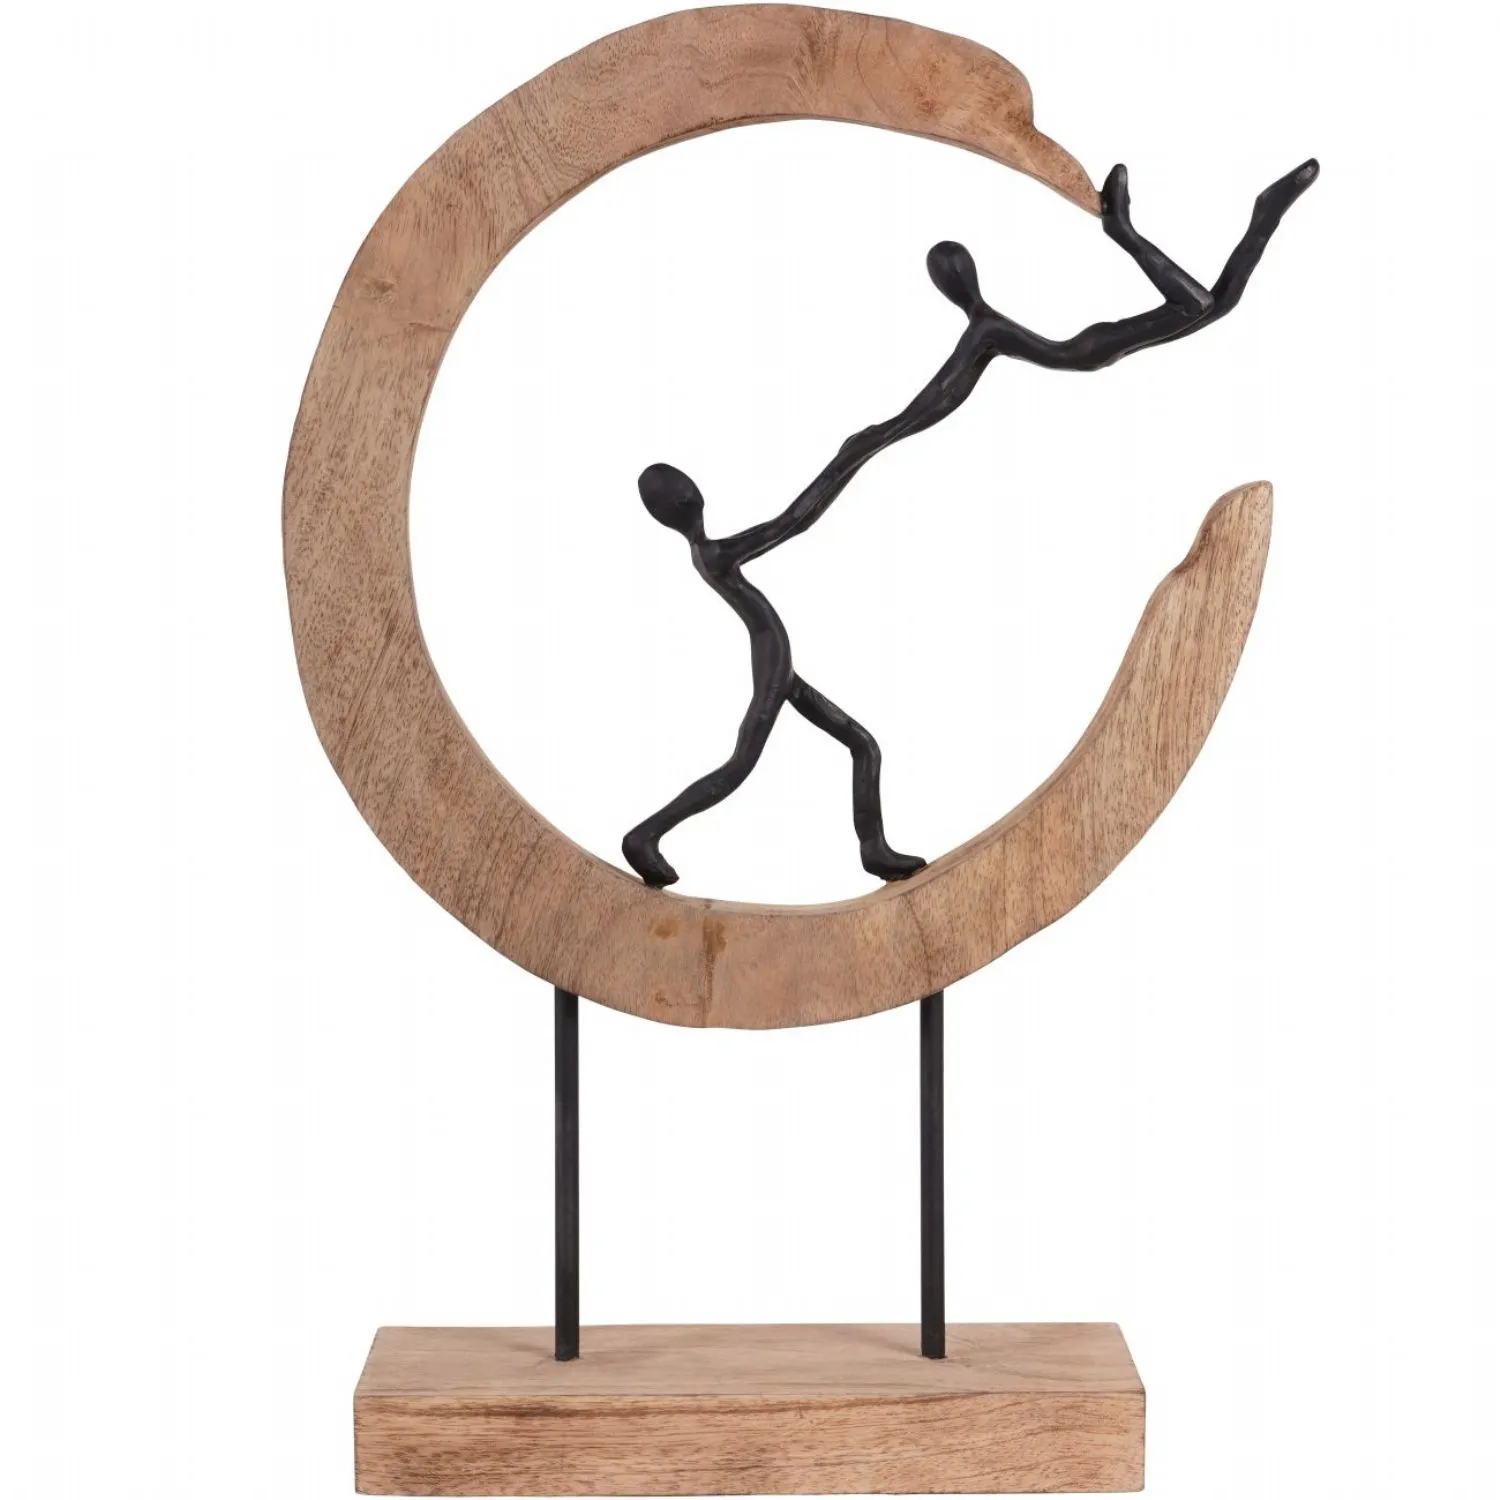 Playful People in Sculpture on Wooden Stand